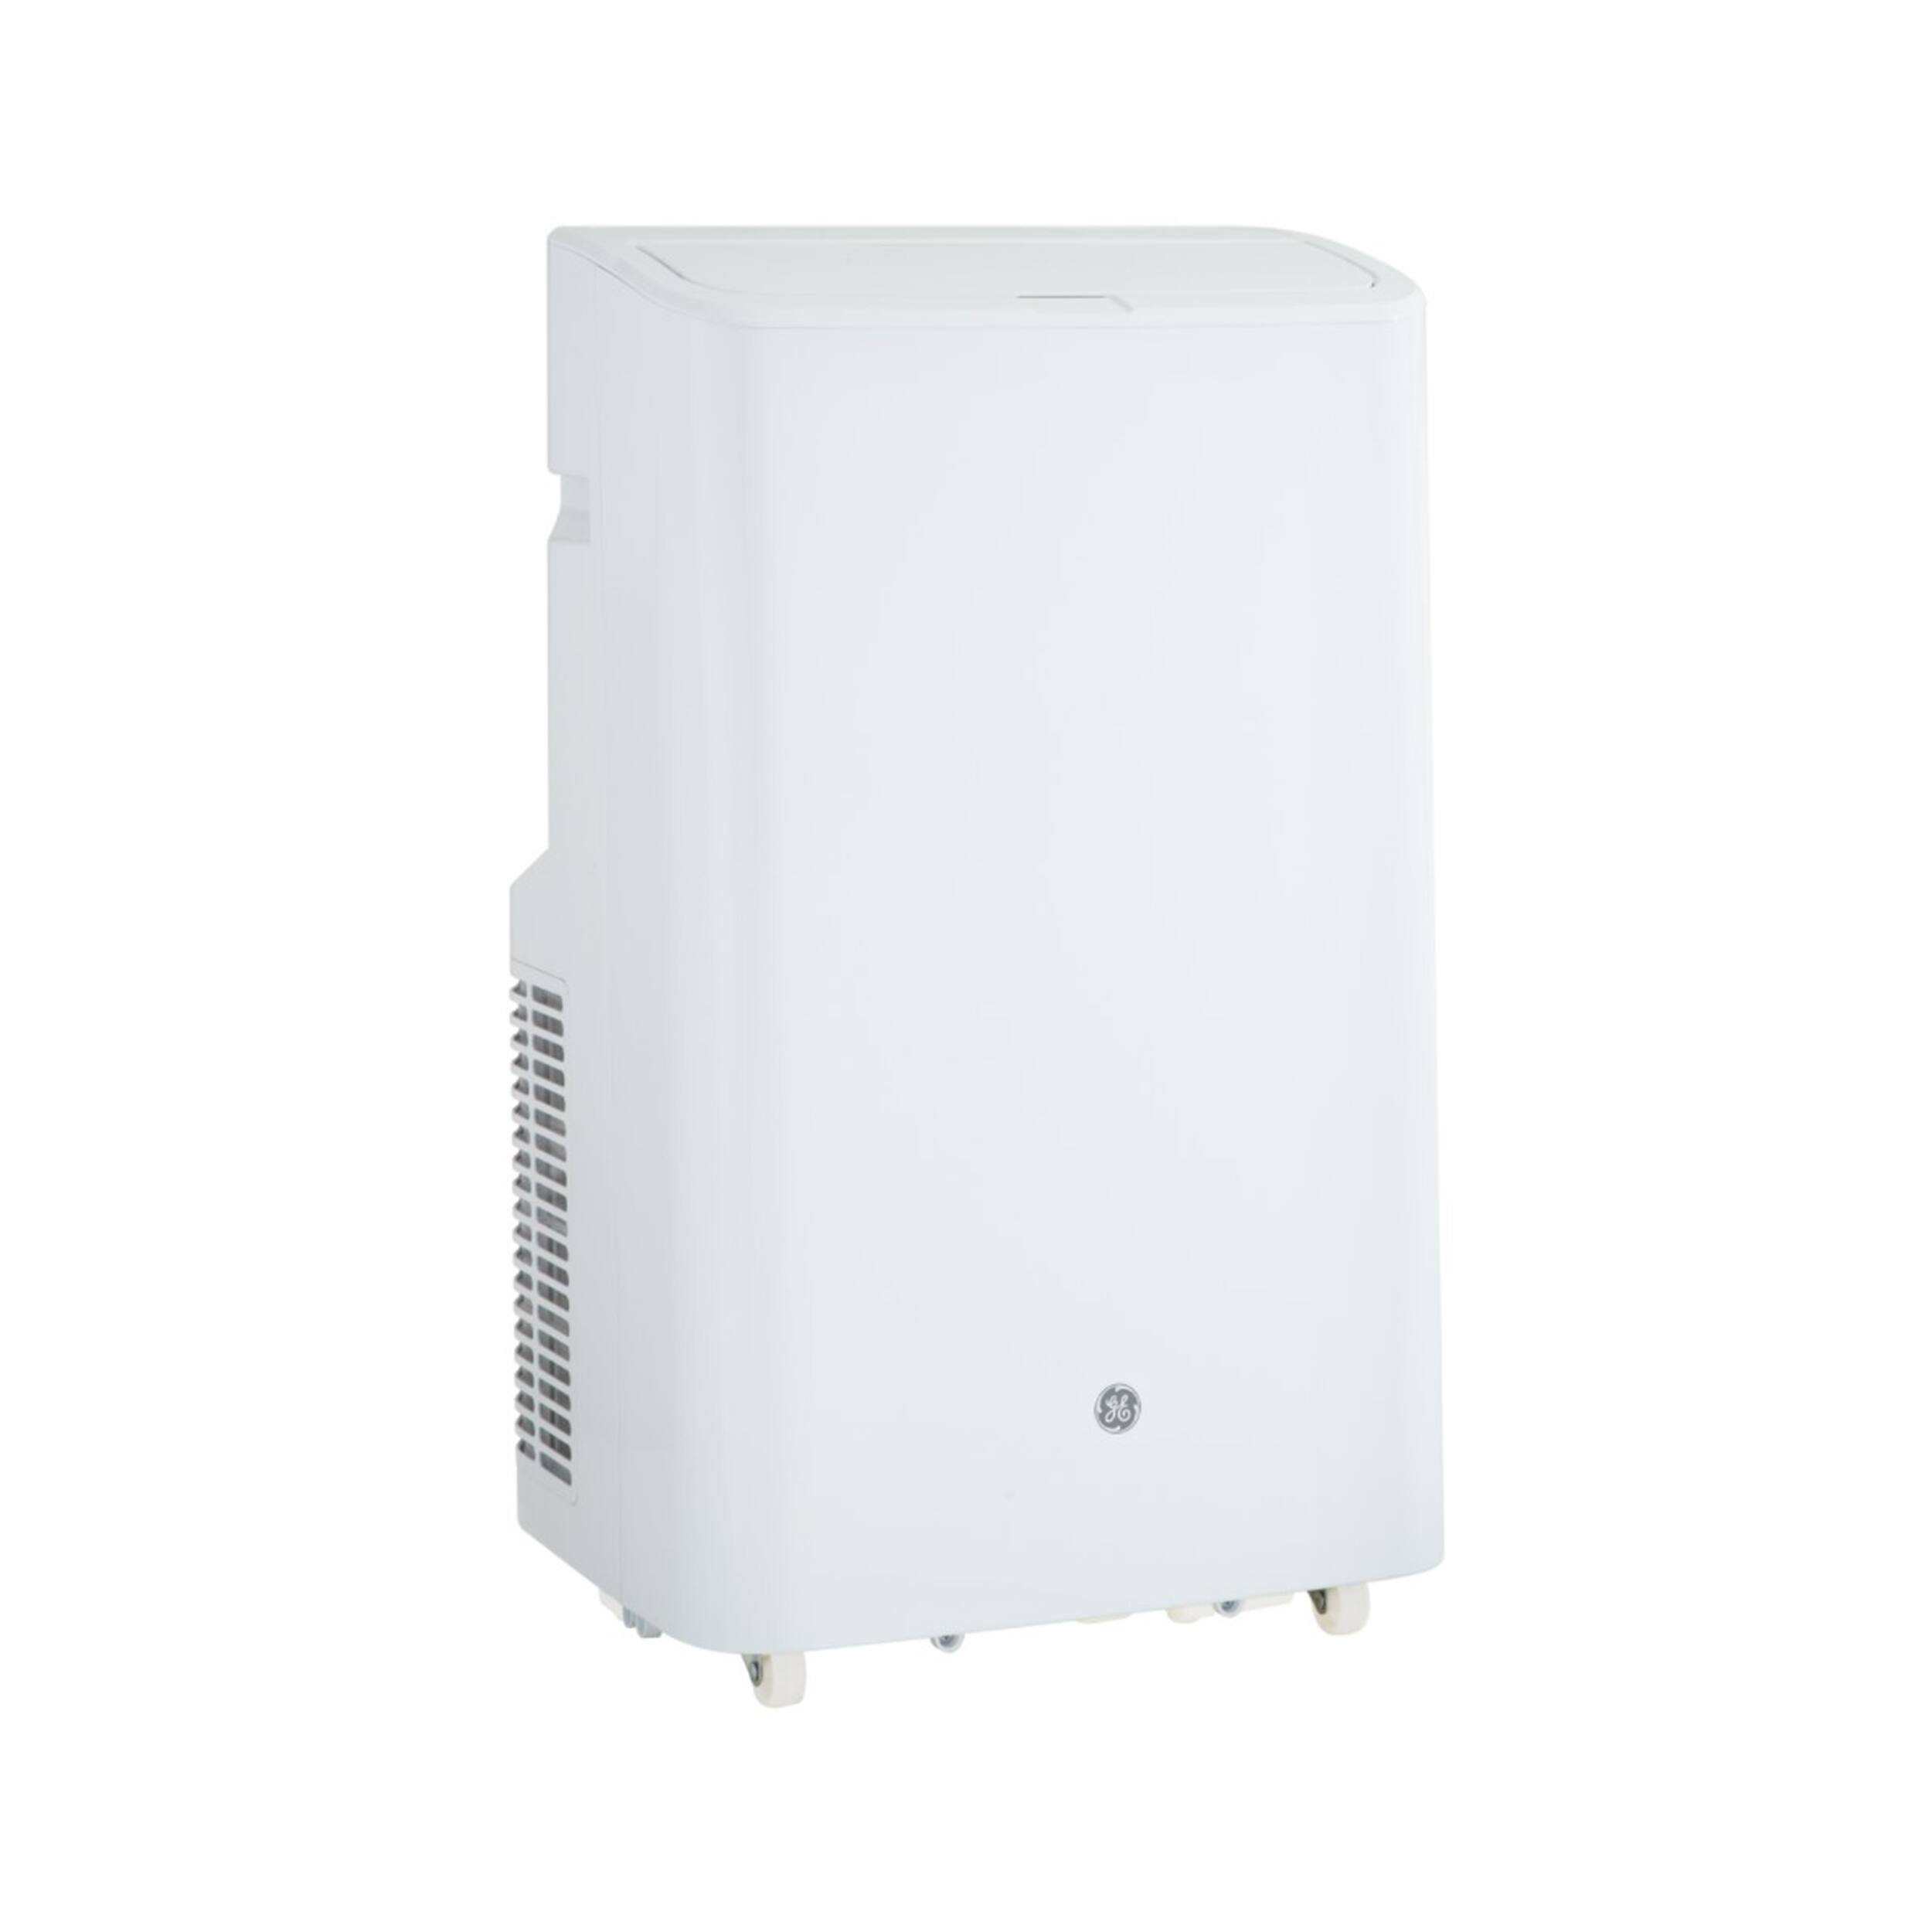 GE 8,500 BTU Portable Air Conditioner with Dehumifier and Remote, White - Refurbished